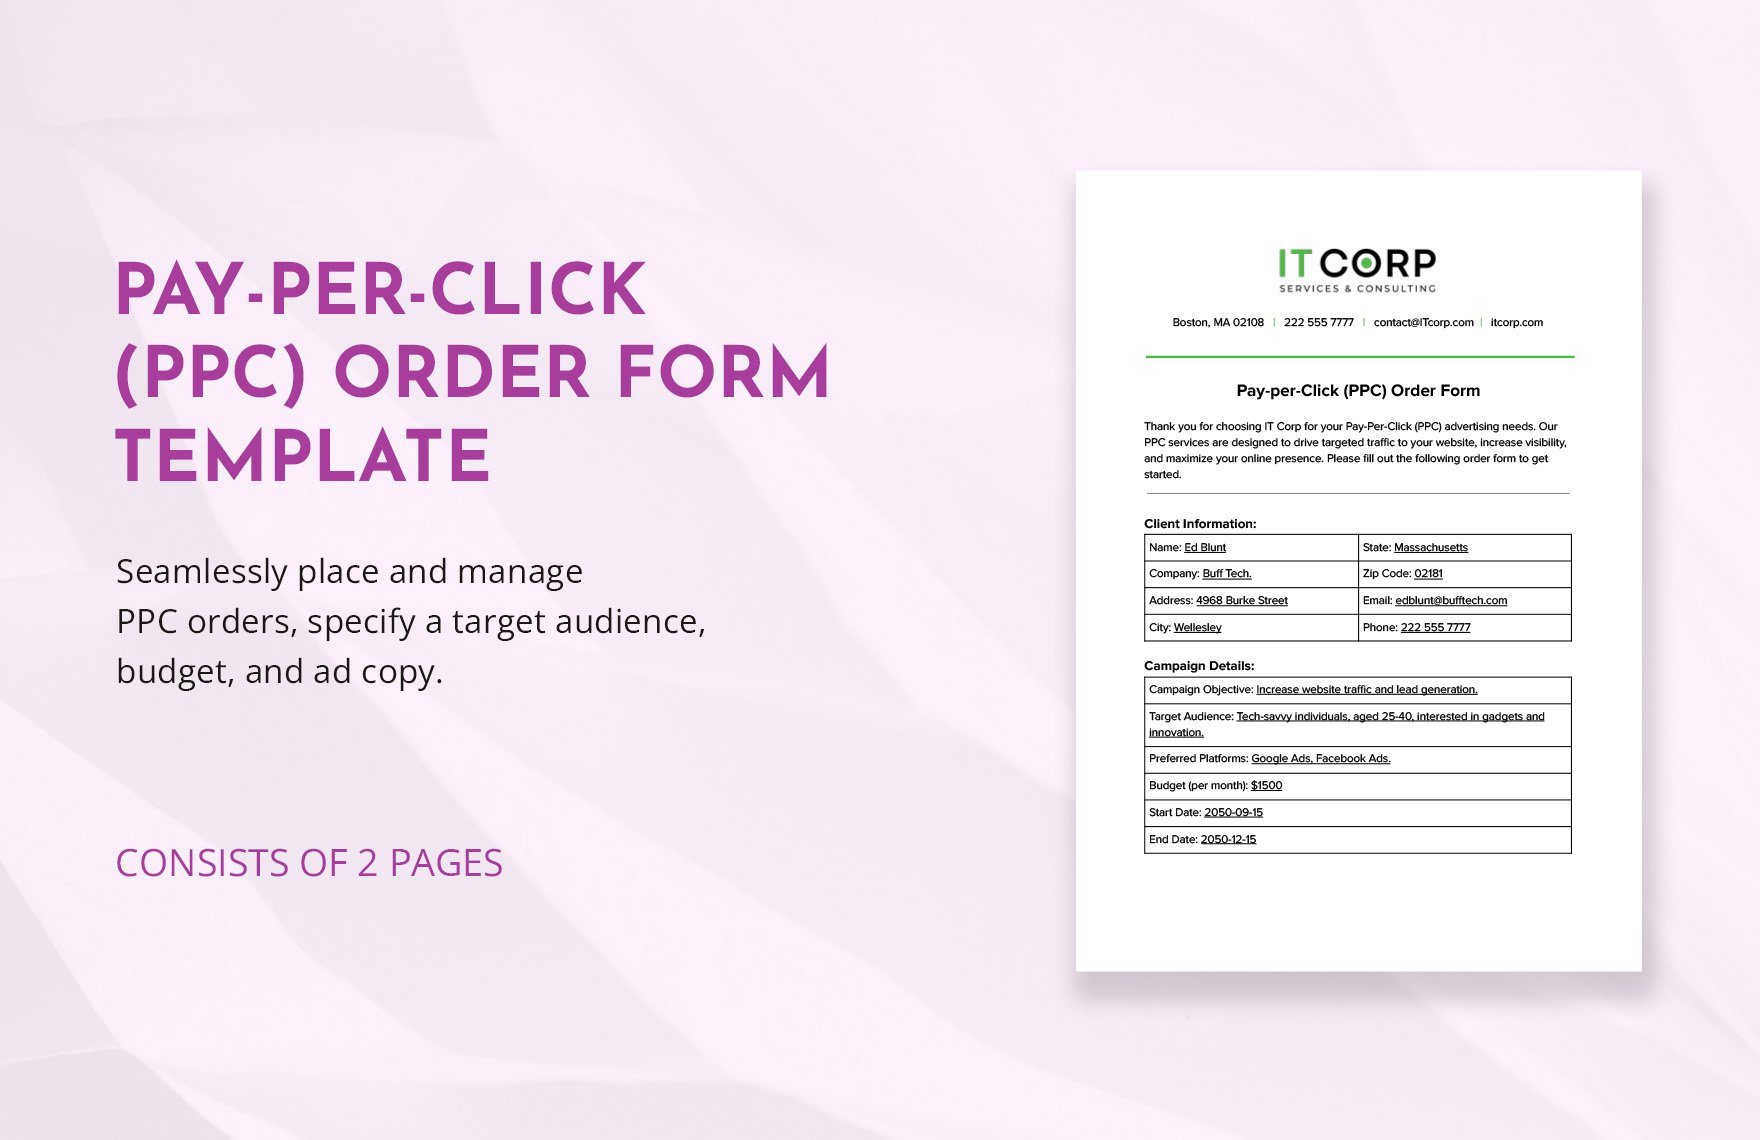 Pay-per-Click (PPC) Order Form Template